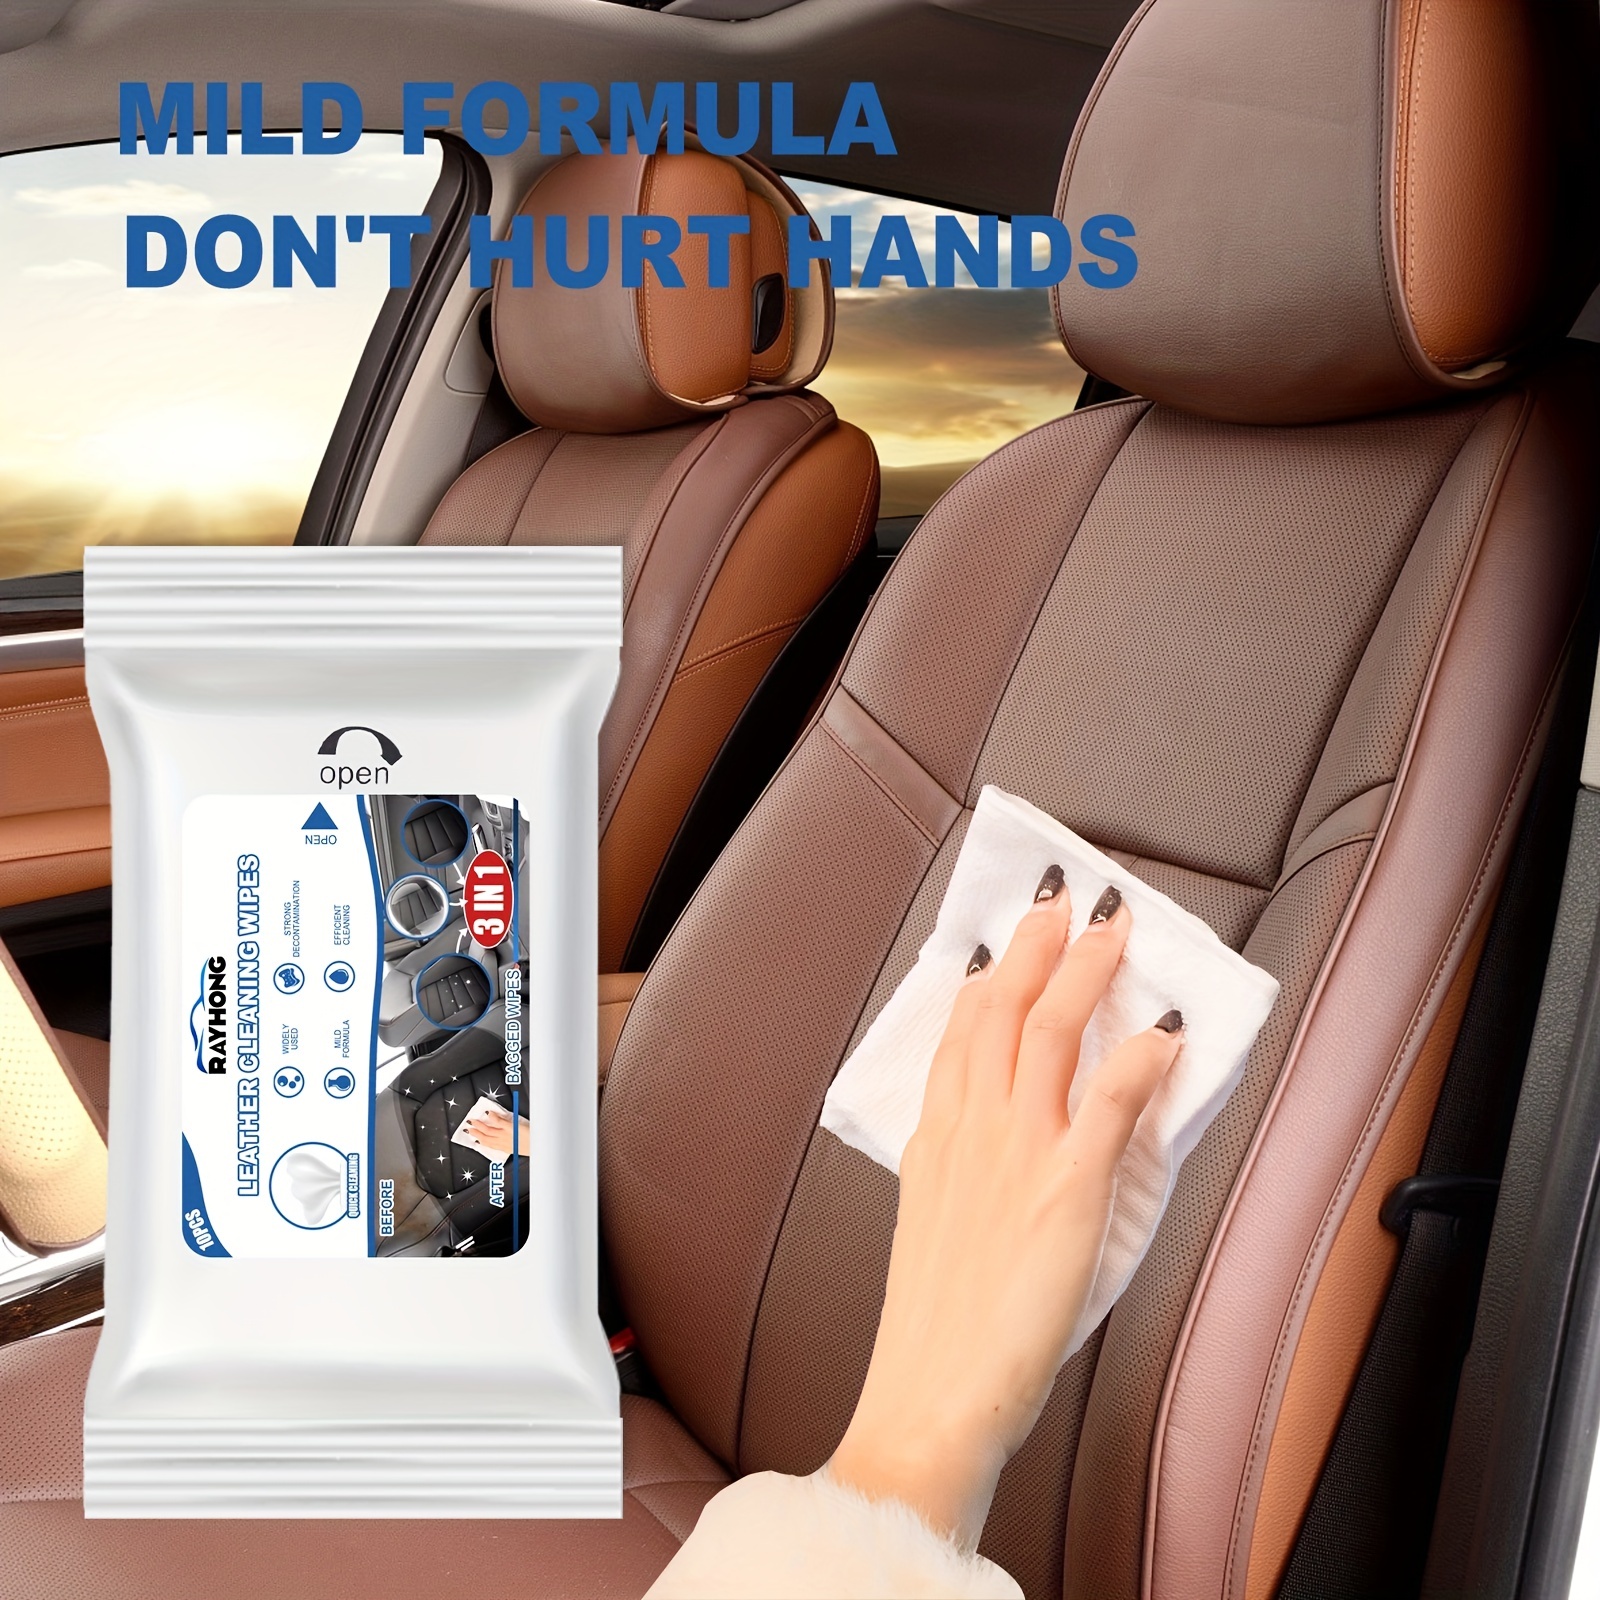  Car Leather Wipes for Leather Cleaner for Car Interior